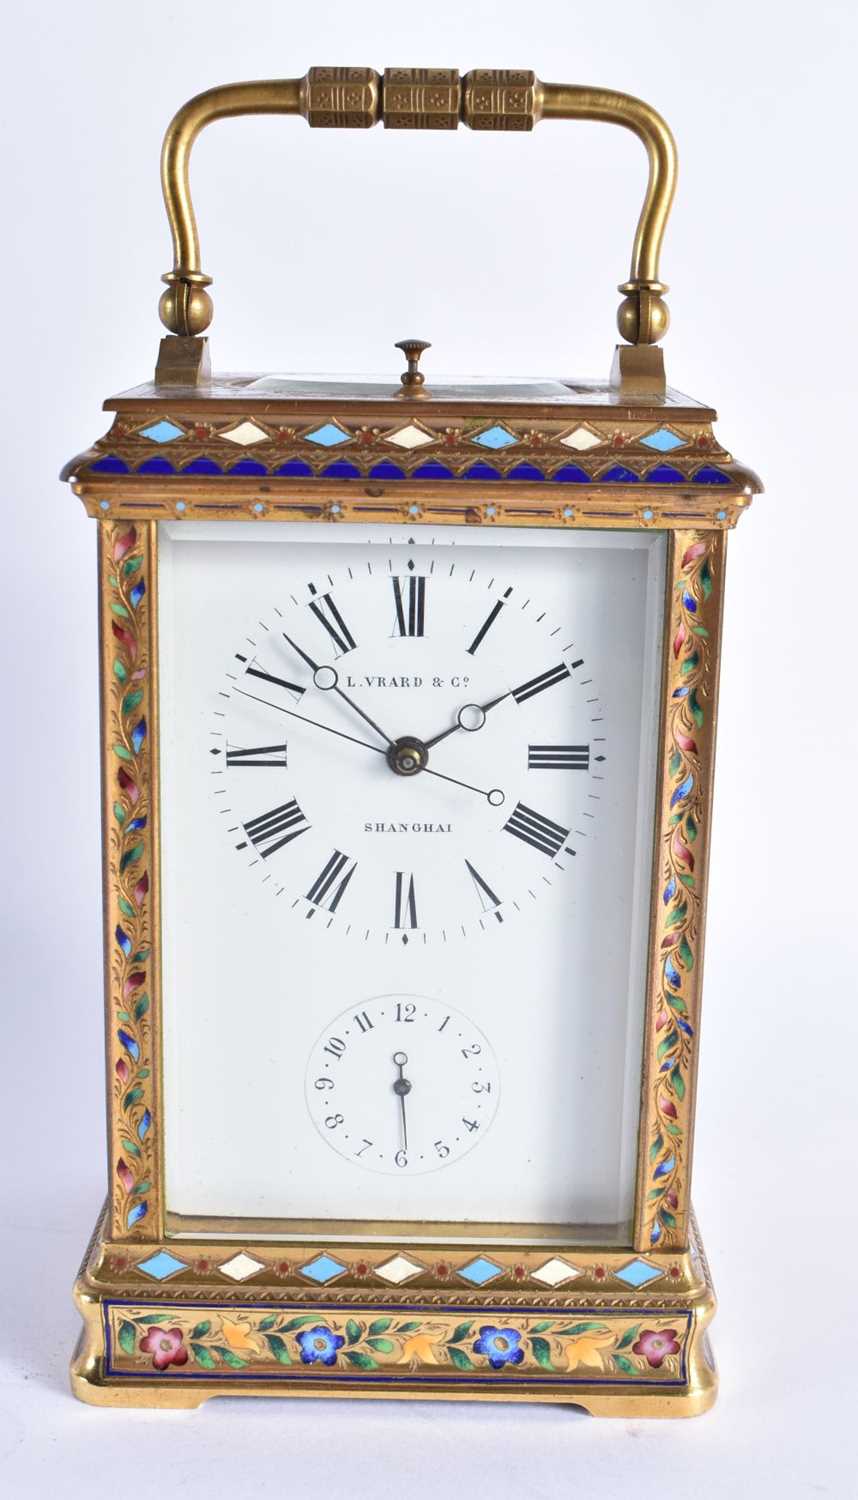 A VERY GOOD 19TH CENTURY FRENCH CHINESE MARKET ENAMELLED GILT BRONZE REPEATING CARRIAGE CLOCK the